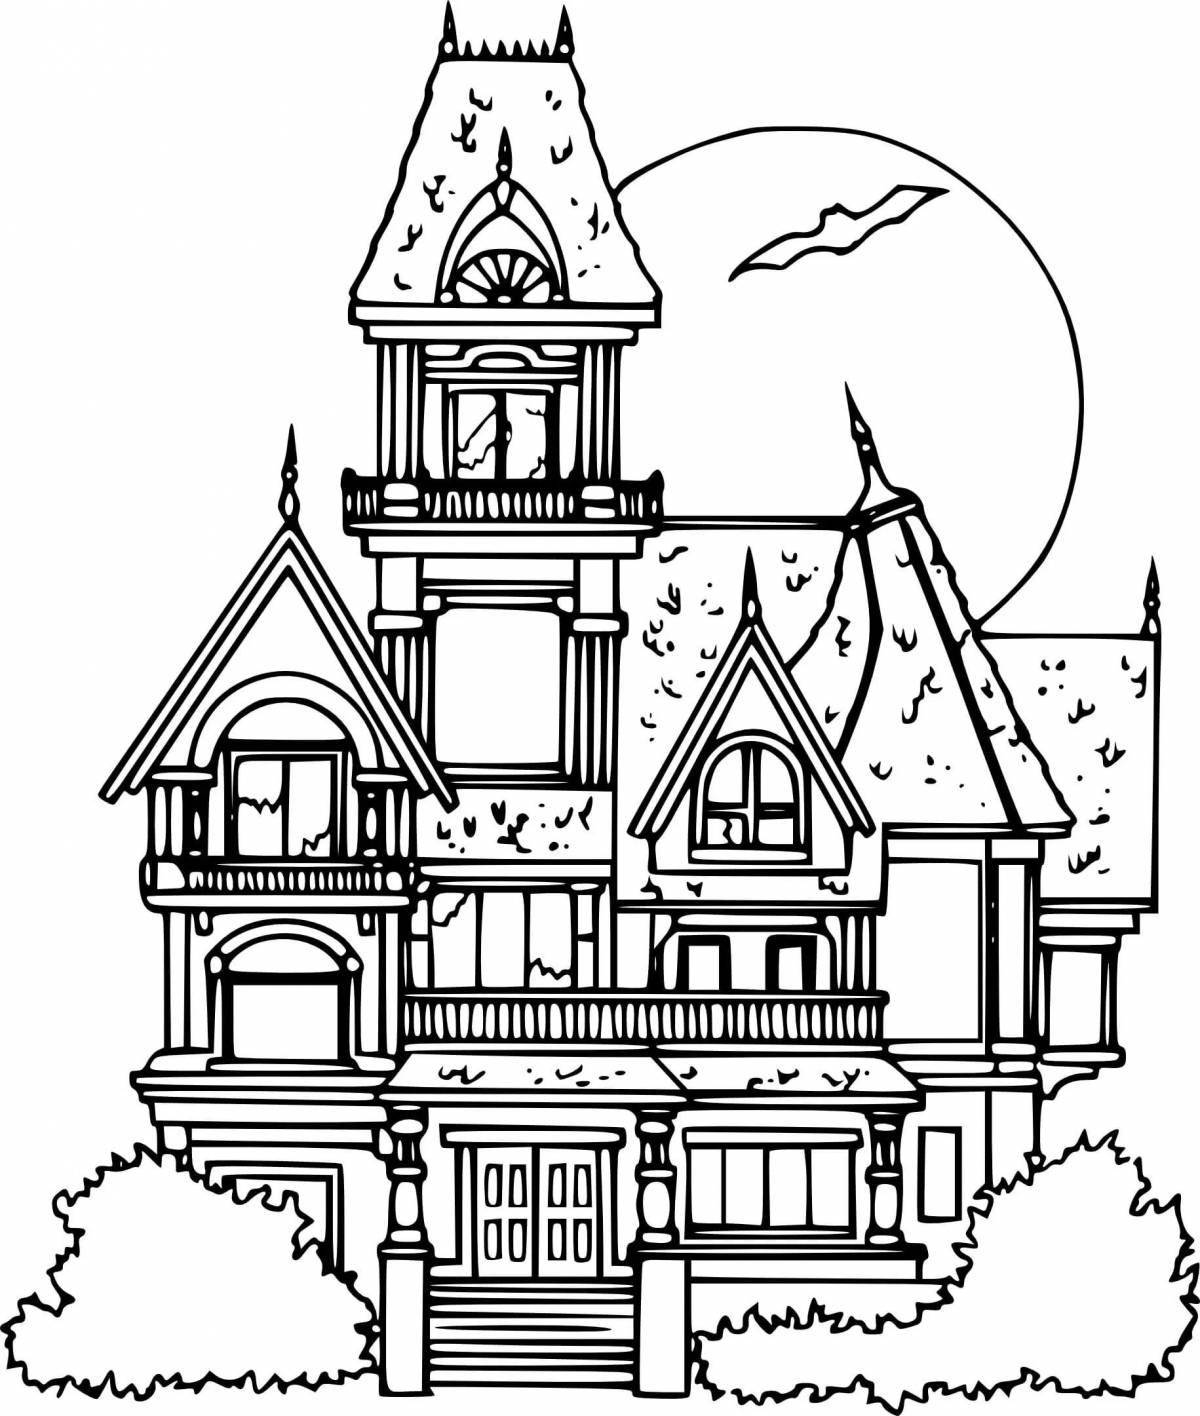 Haunted magic house coloring page